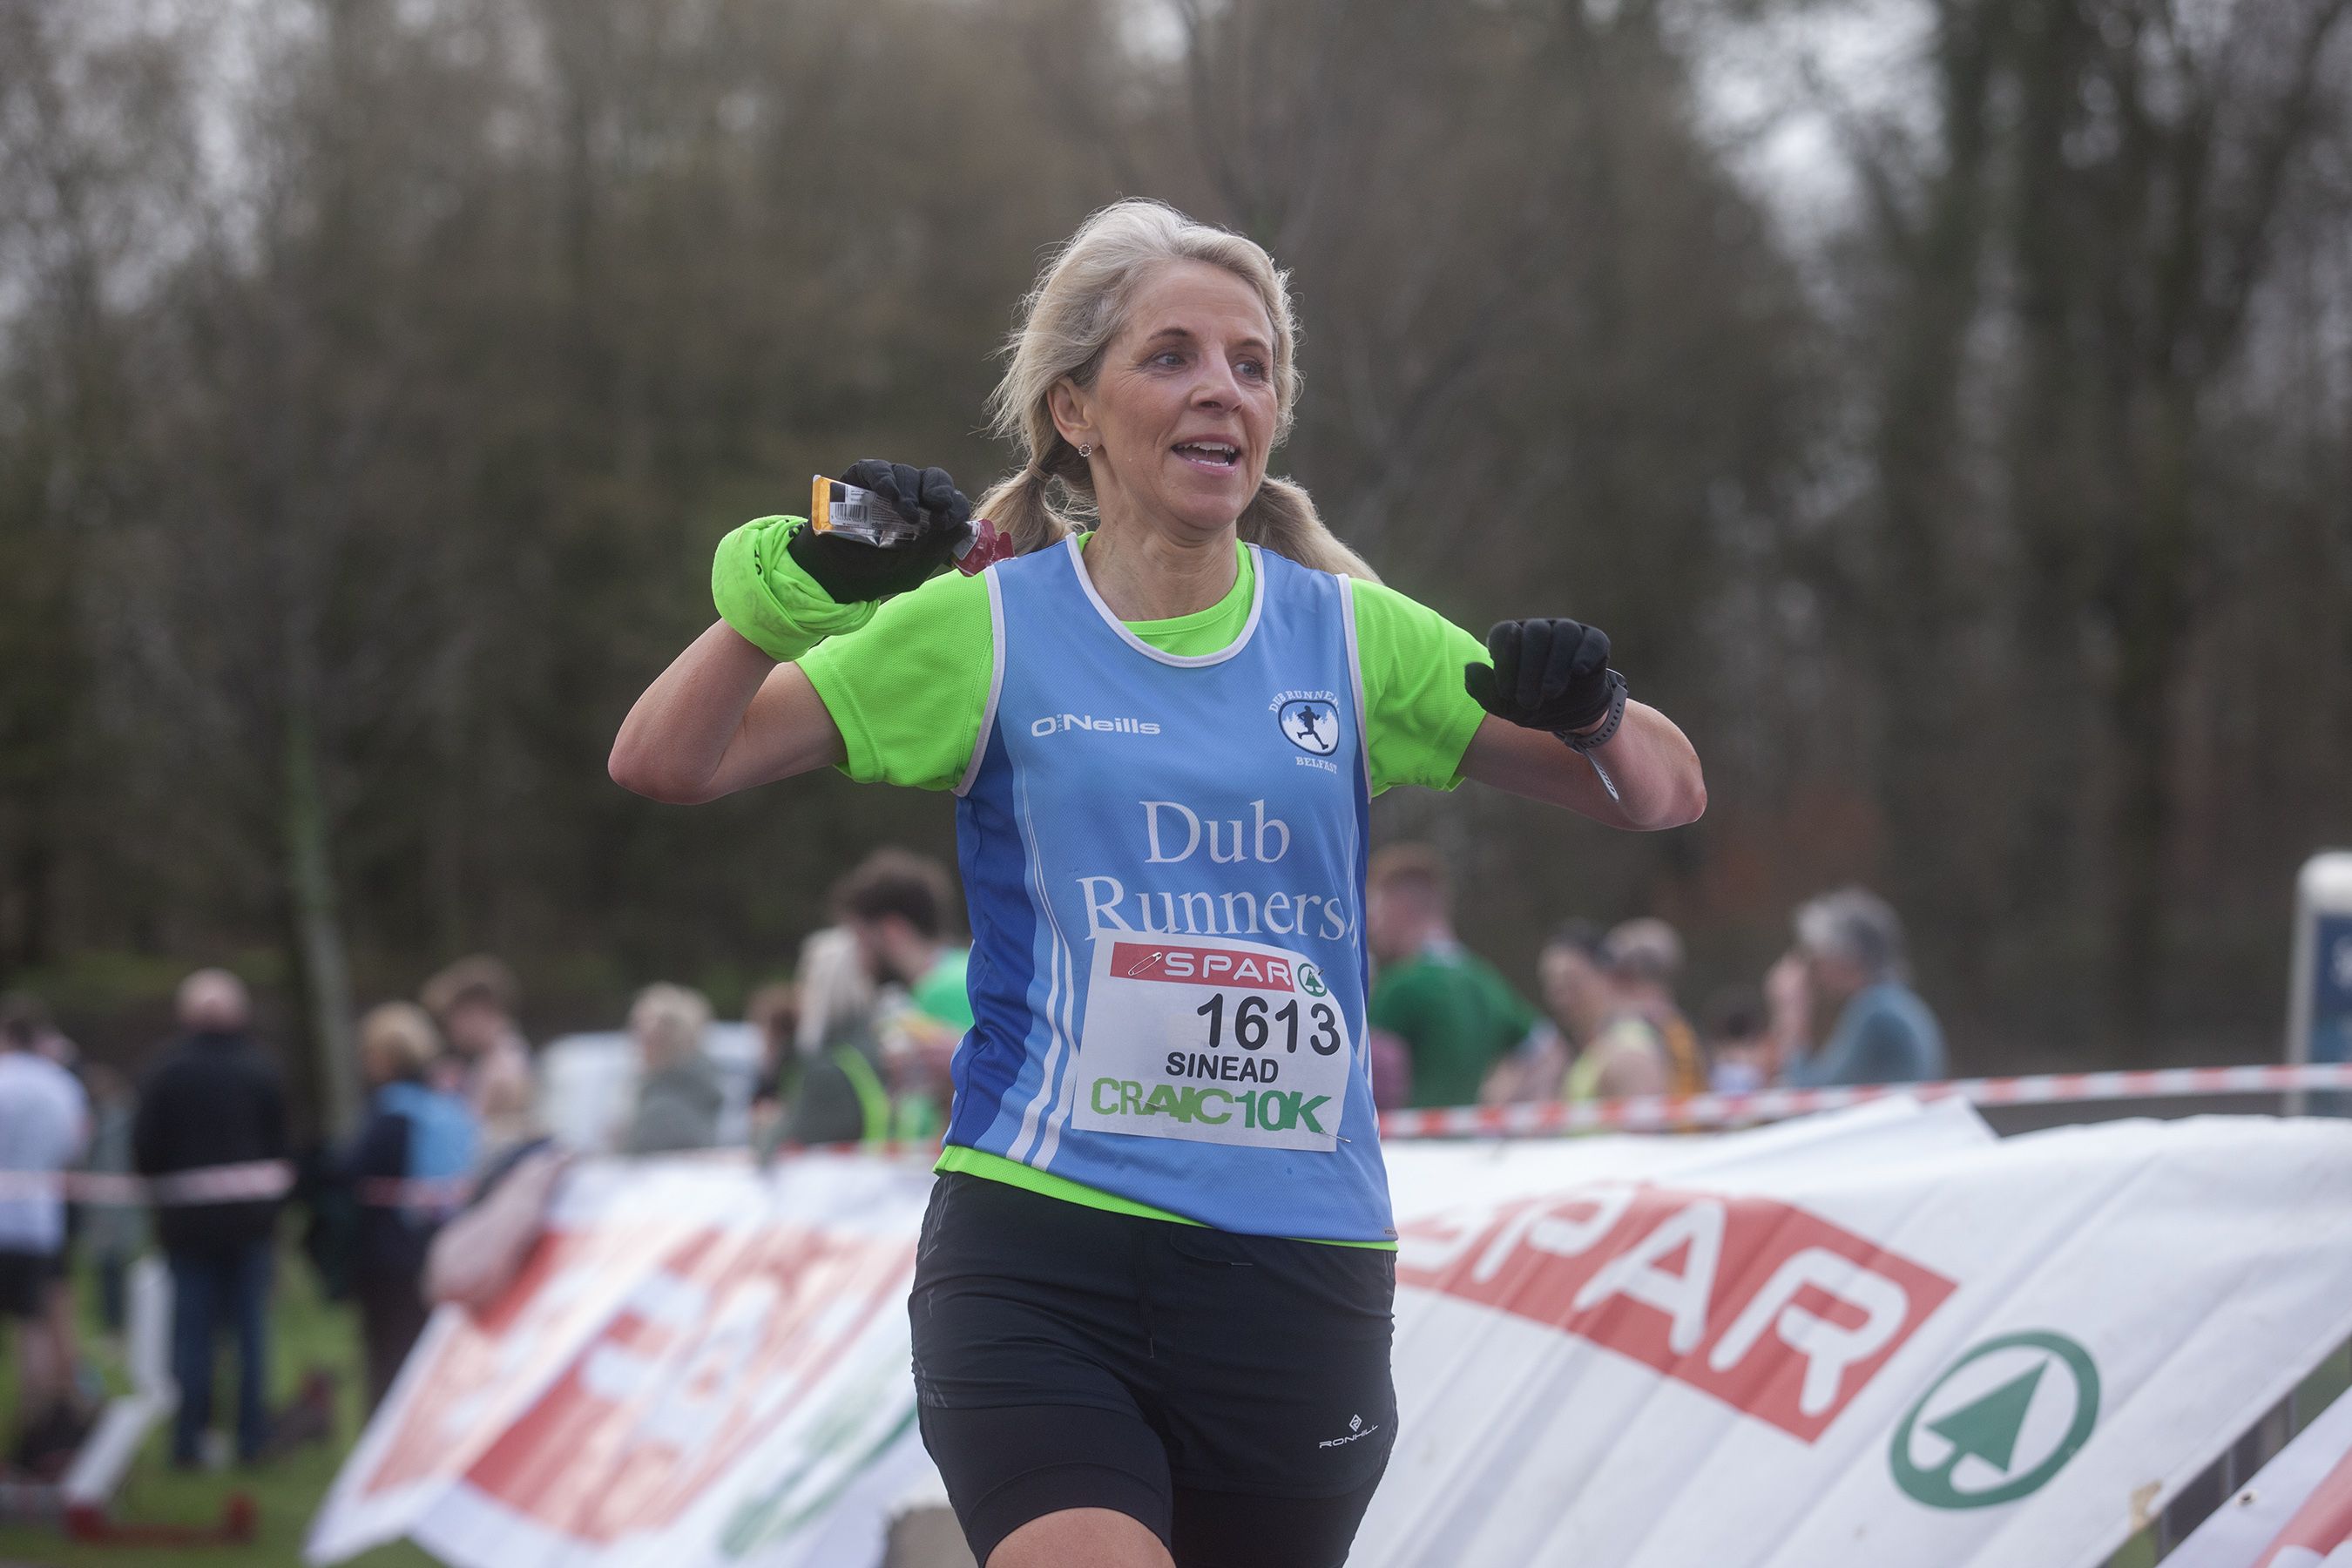 SPAR CRAIC 10K: Going beyond your comfort zone can free you from imposed limitations